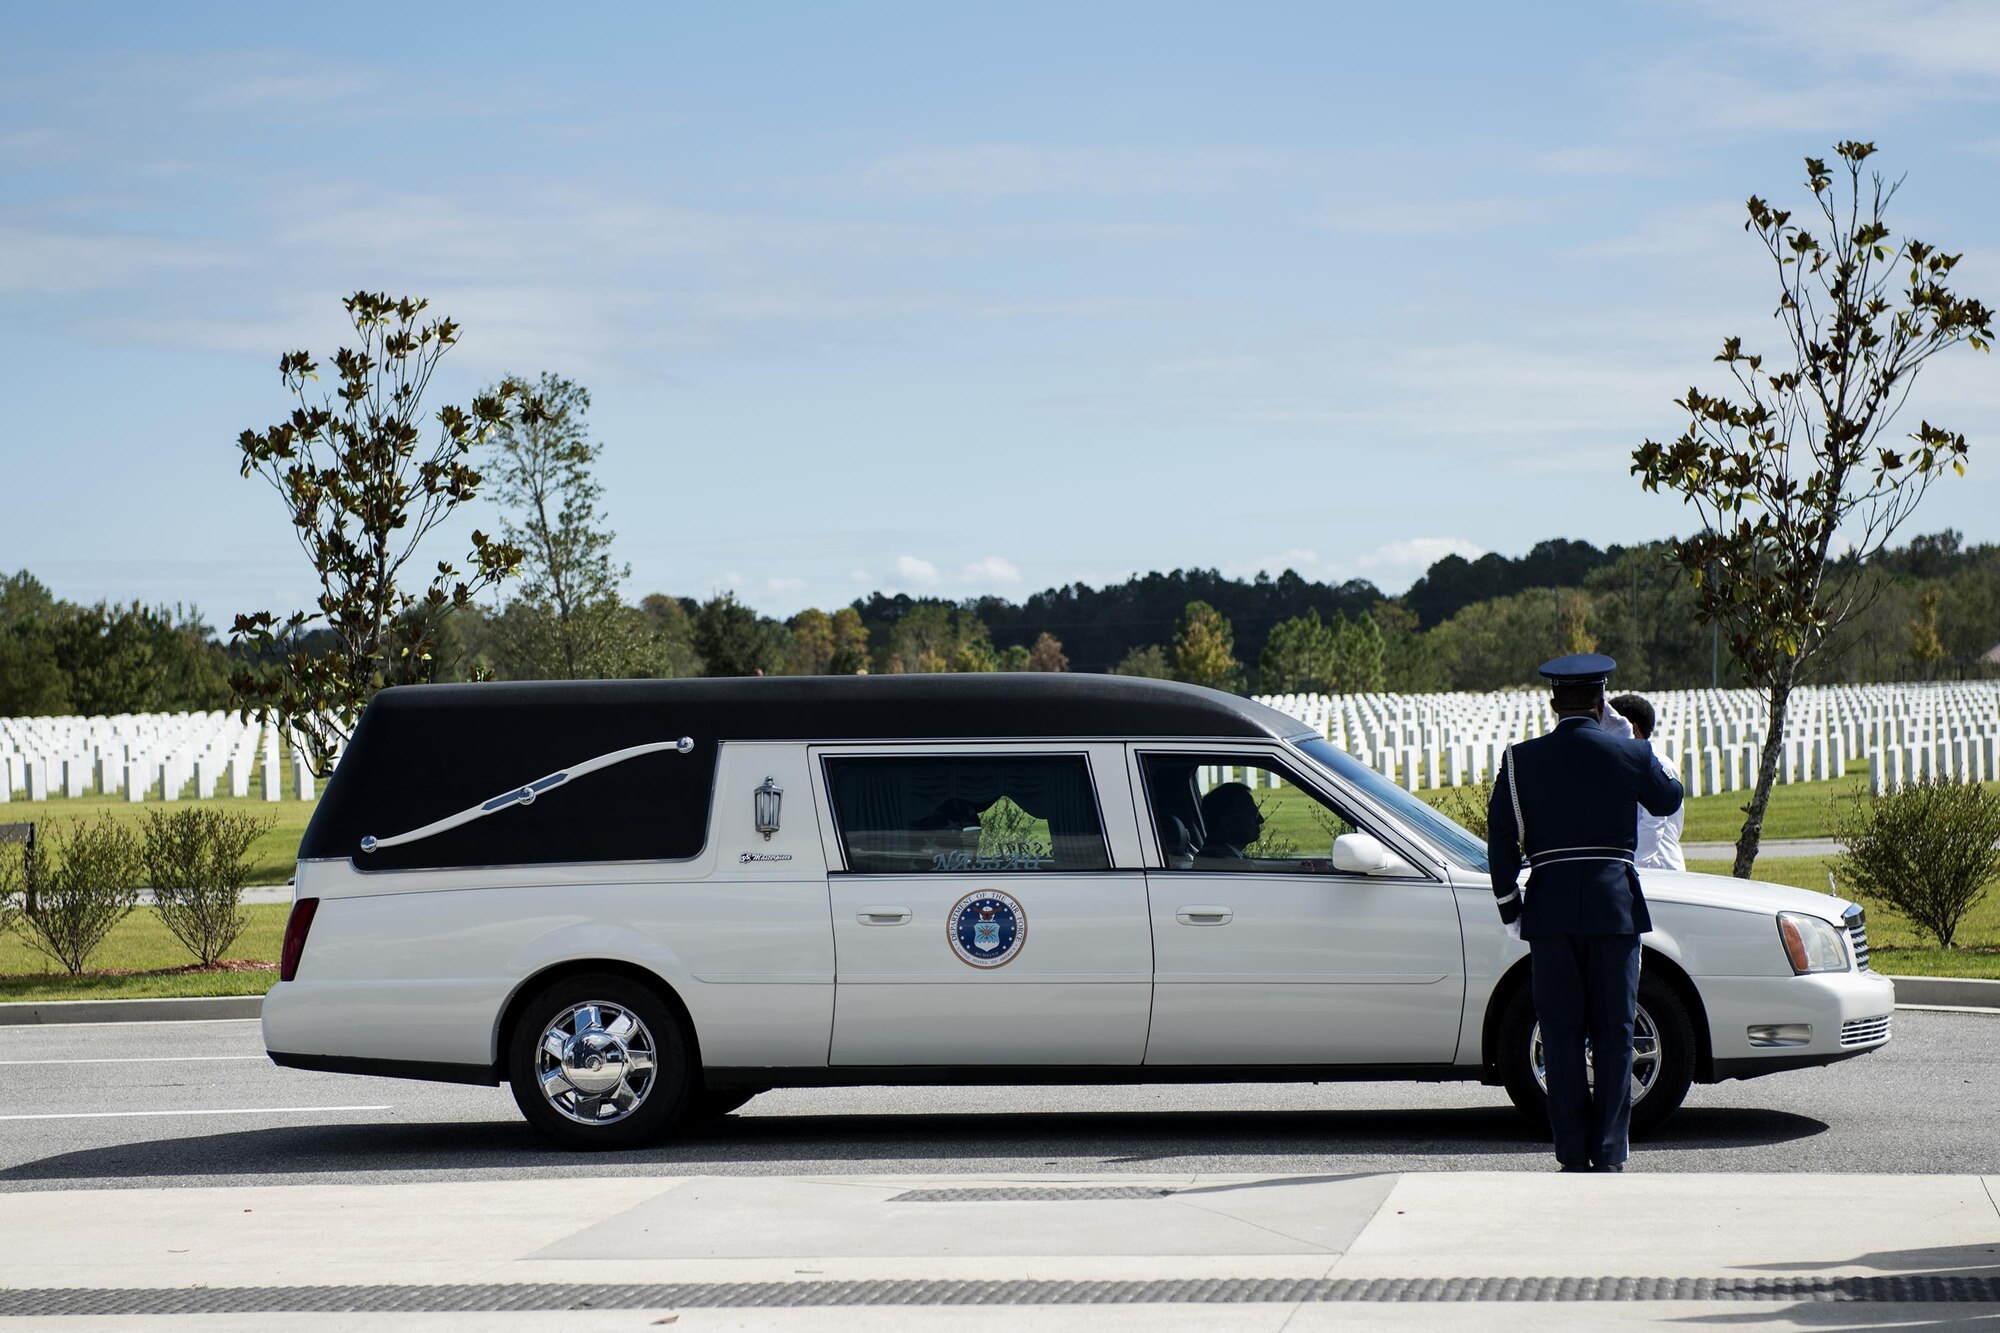 A member of the Moody Air Force Base Honor Guard salutes a hearse during a funeral, Oct. 13, 2016, in Jacksonville, Fla. For this particular funeral, Moody’s honor guard took 21 members, splitting them into various details to perform military honors for a fallen active-duty member. (U.S. Air Force photo by Airman 1st Class Janiqua P. Robinson)